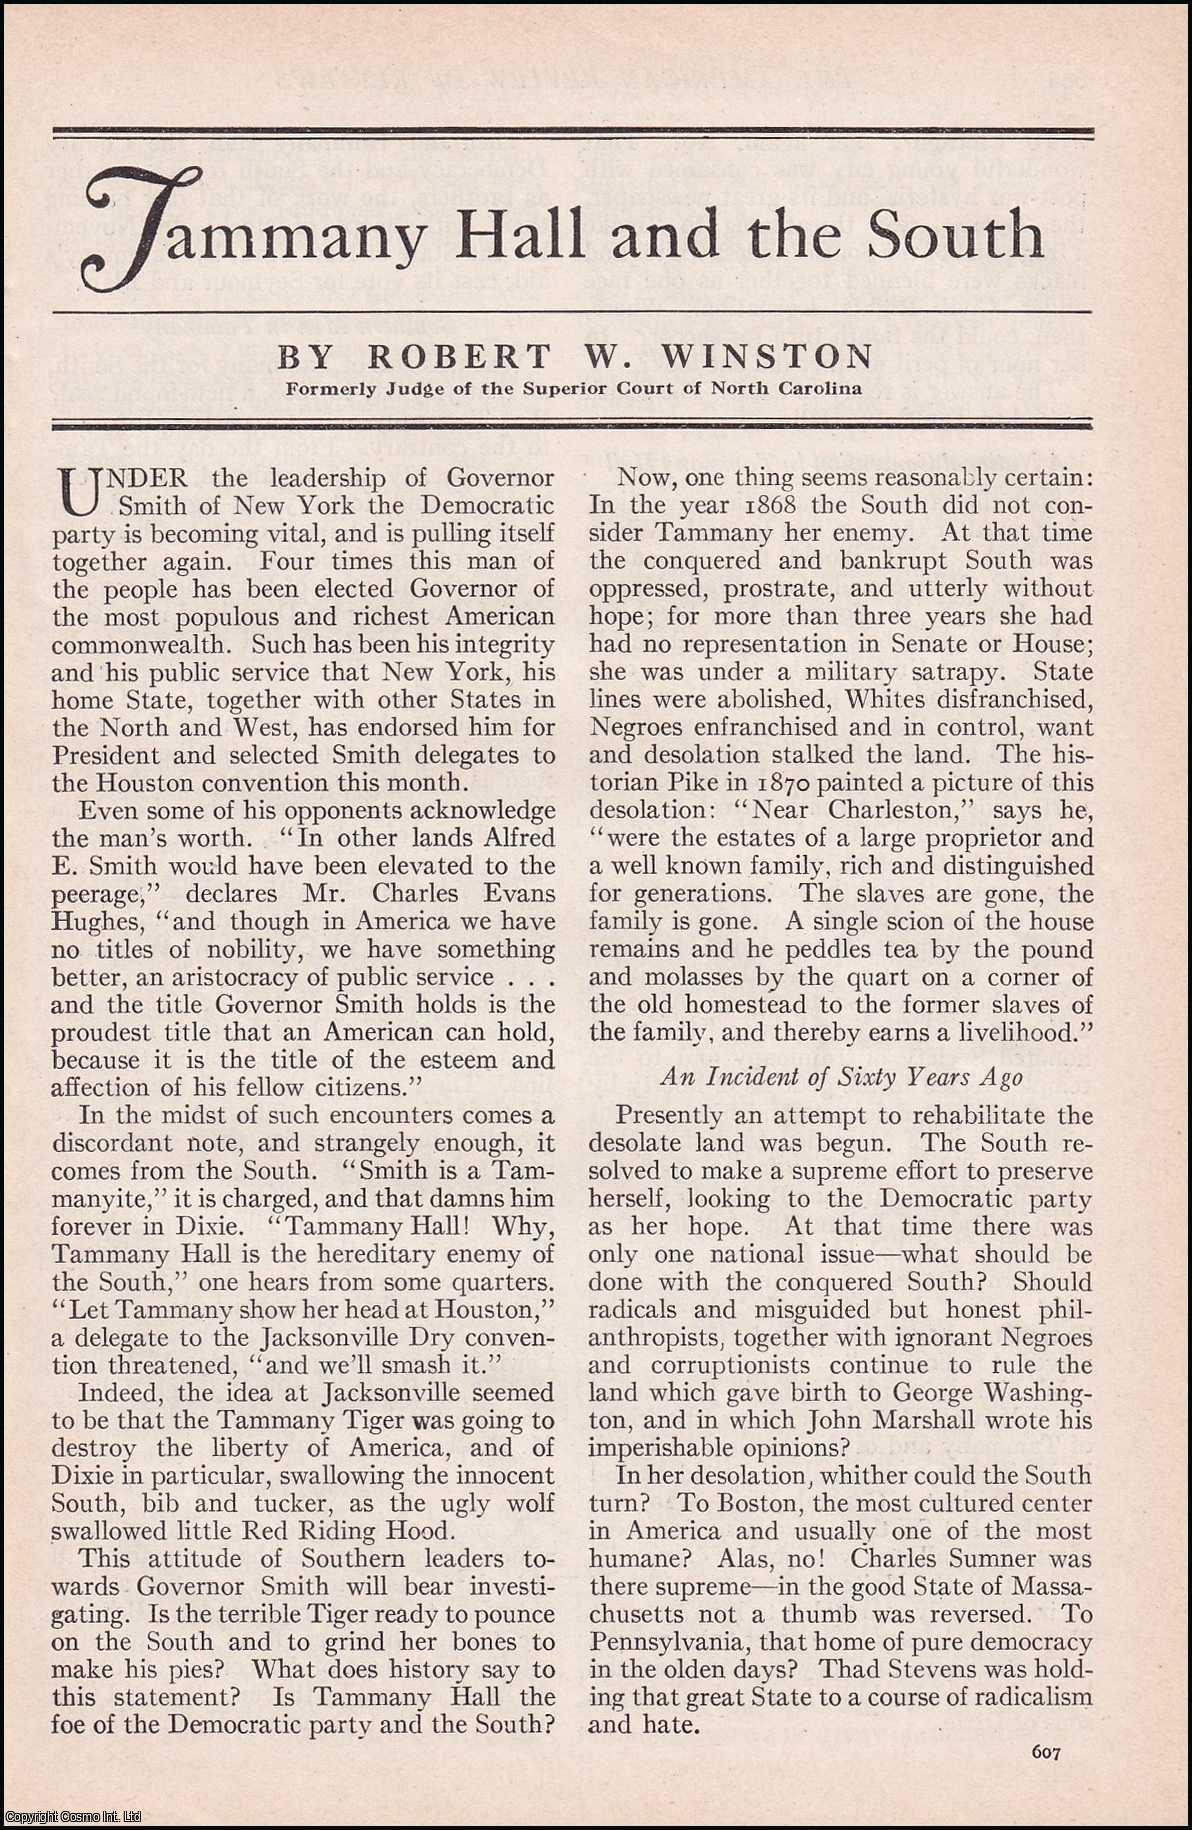 Robert W. Winston, Formerly Judge of the Superior Court of North Carolina. - Tammany Hall, New York & the South. An original article from the American Review of Reviews, 1928.